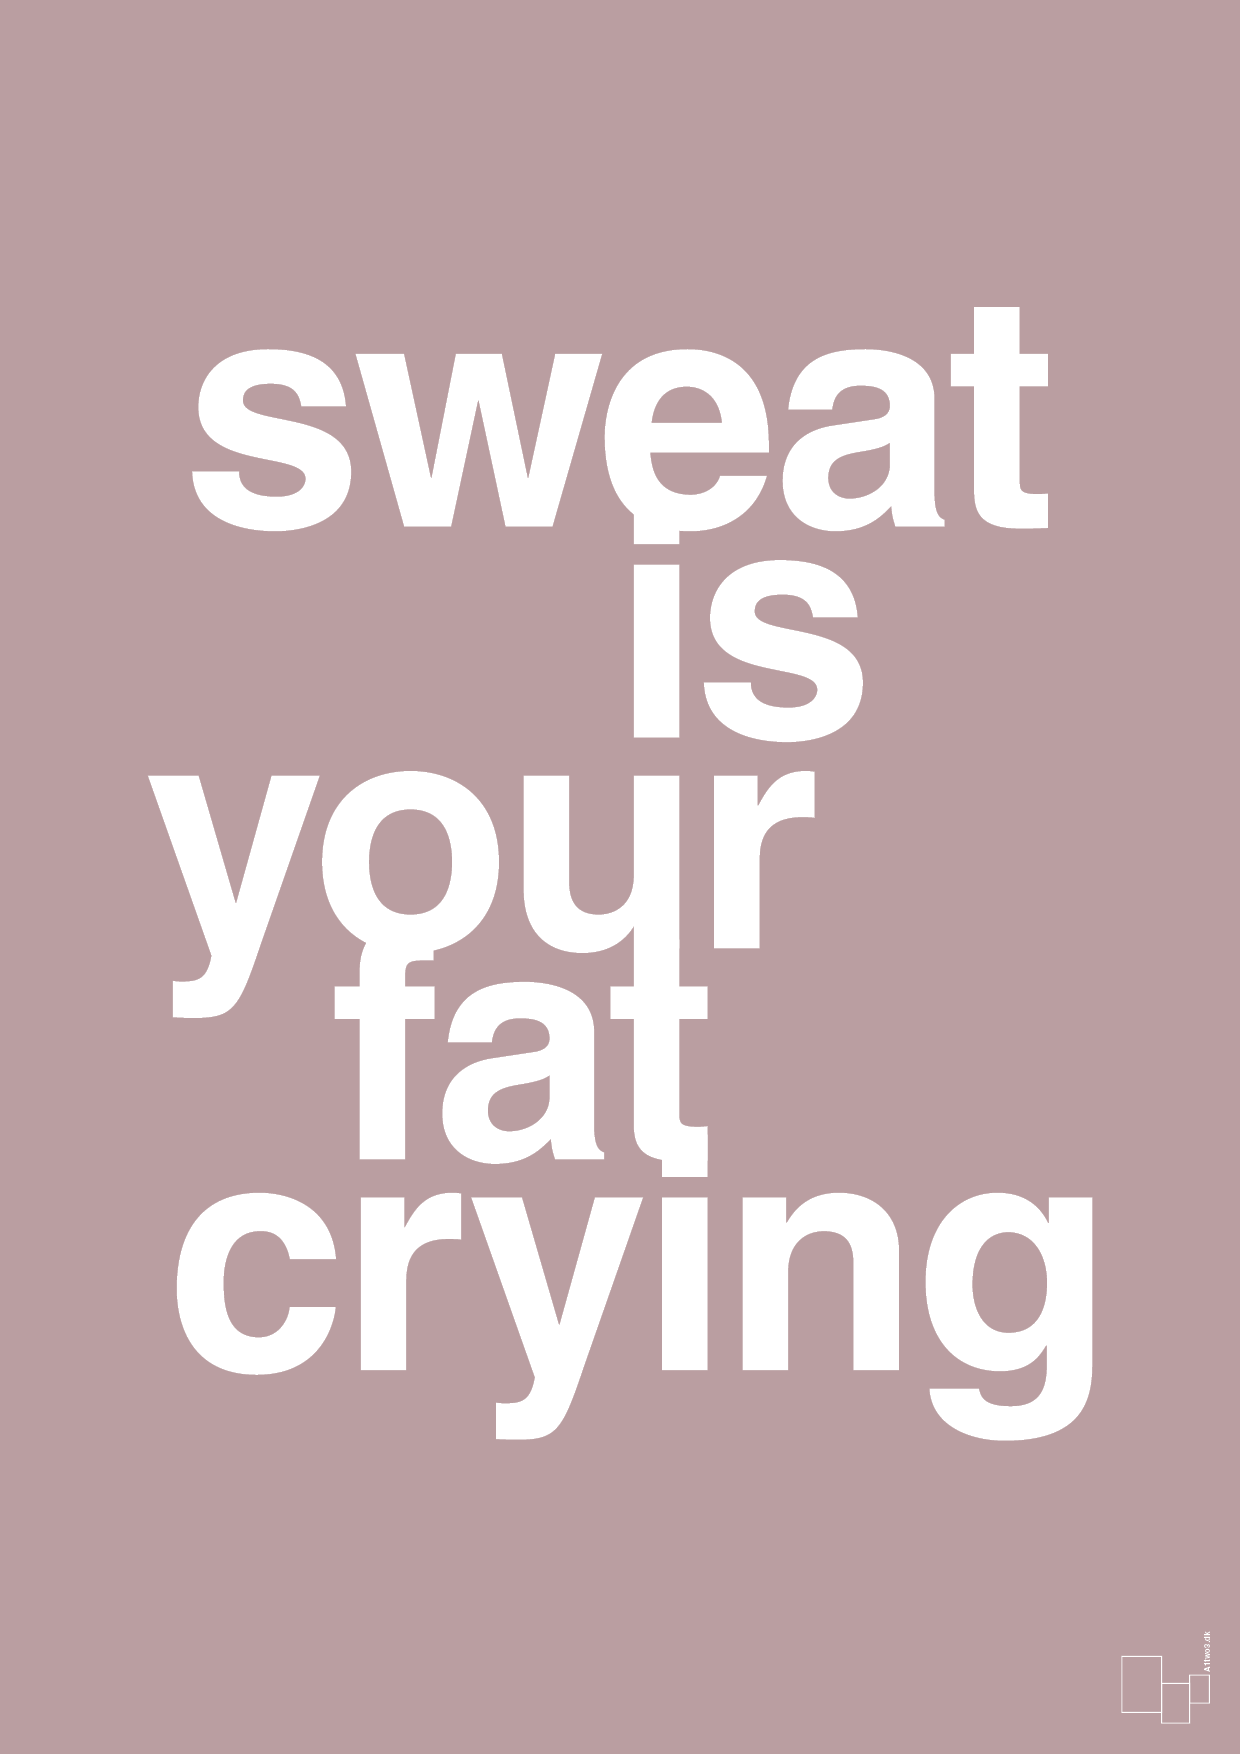 sweat is your fat crying - Plakat med Sport & Fritid i Light Rose